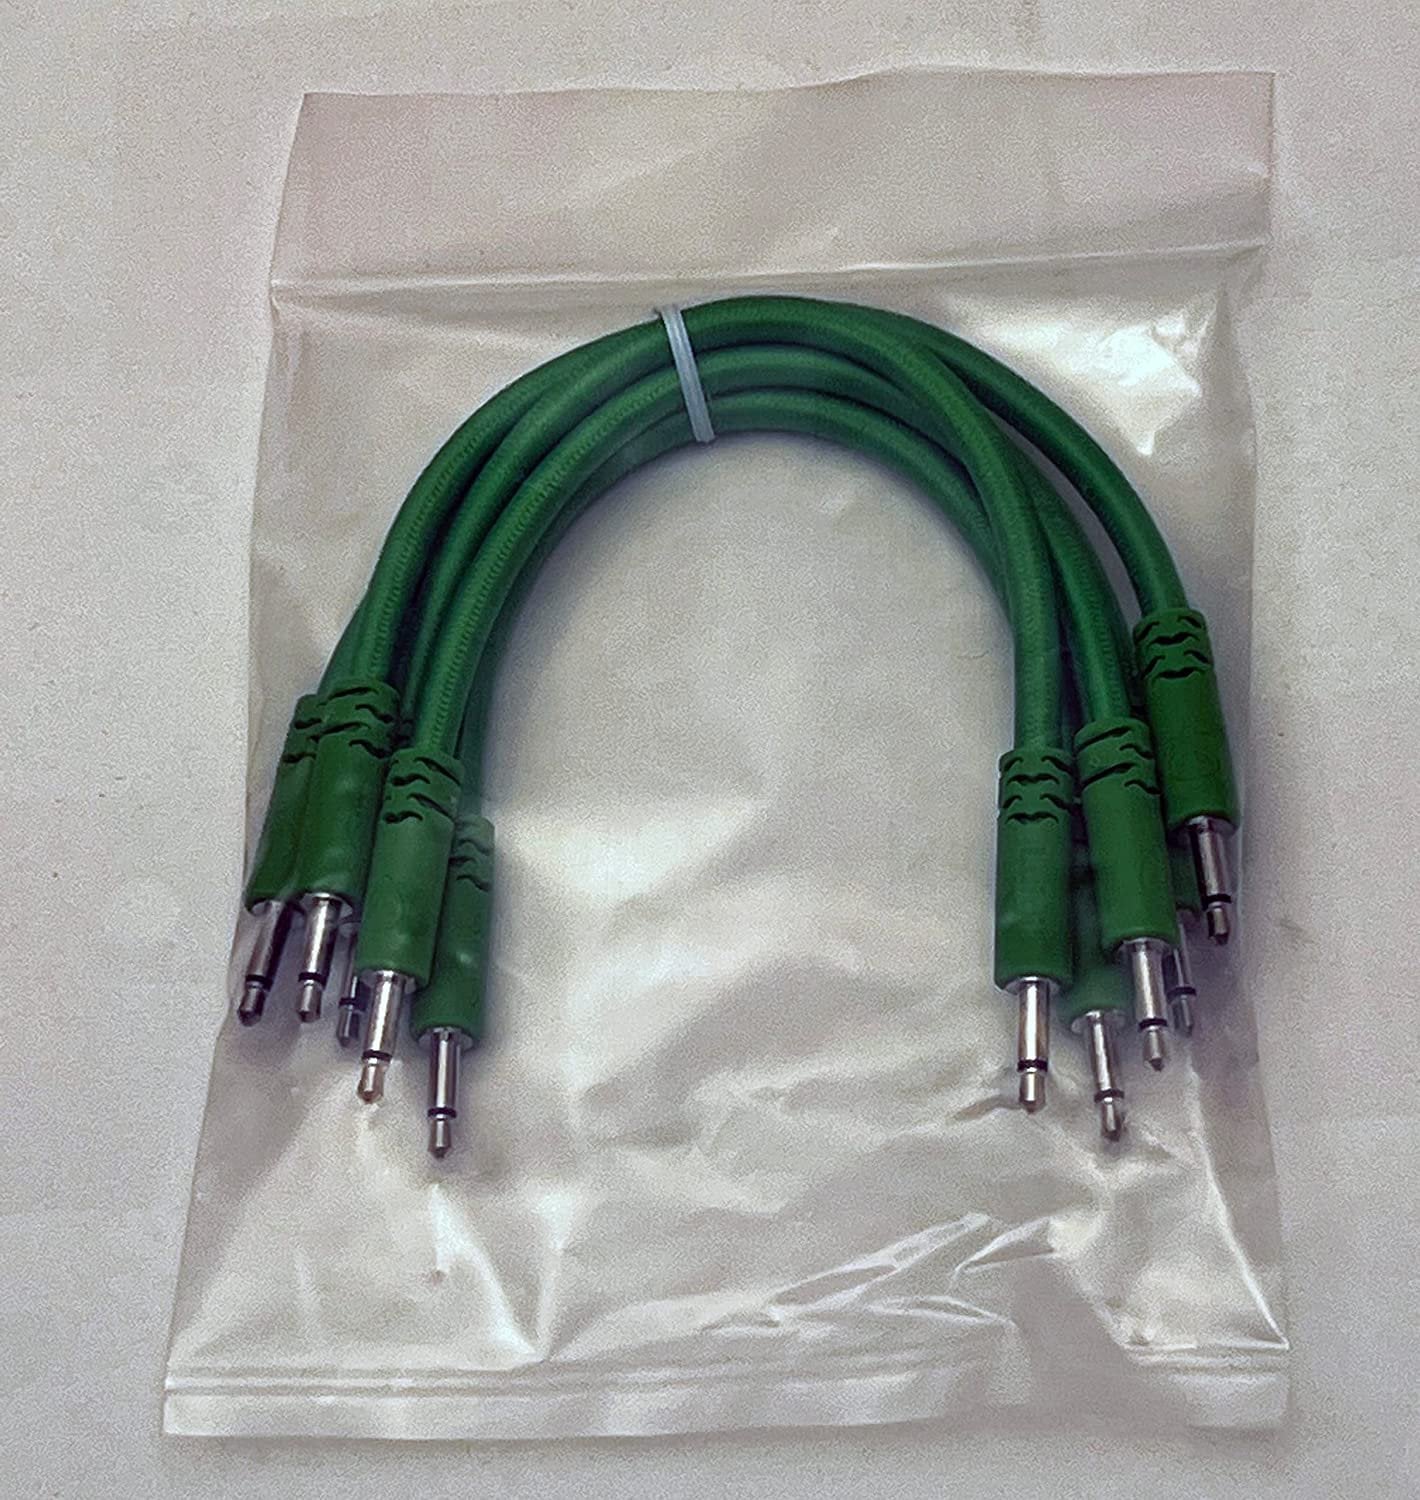 Luigis Modular Bucatini Braided Eurorack Patch Cables - Package of 5 Green Cables, 6" (15 cm)